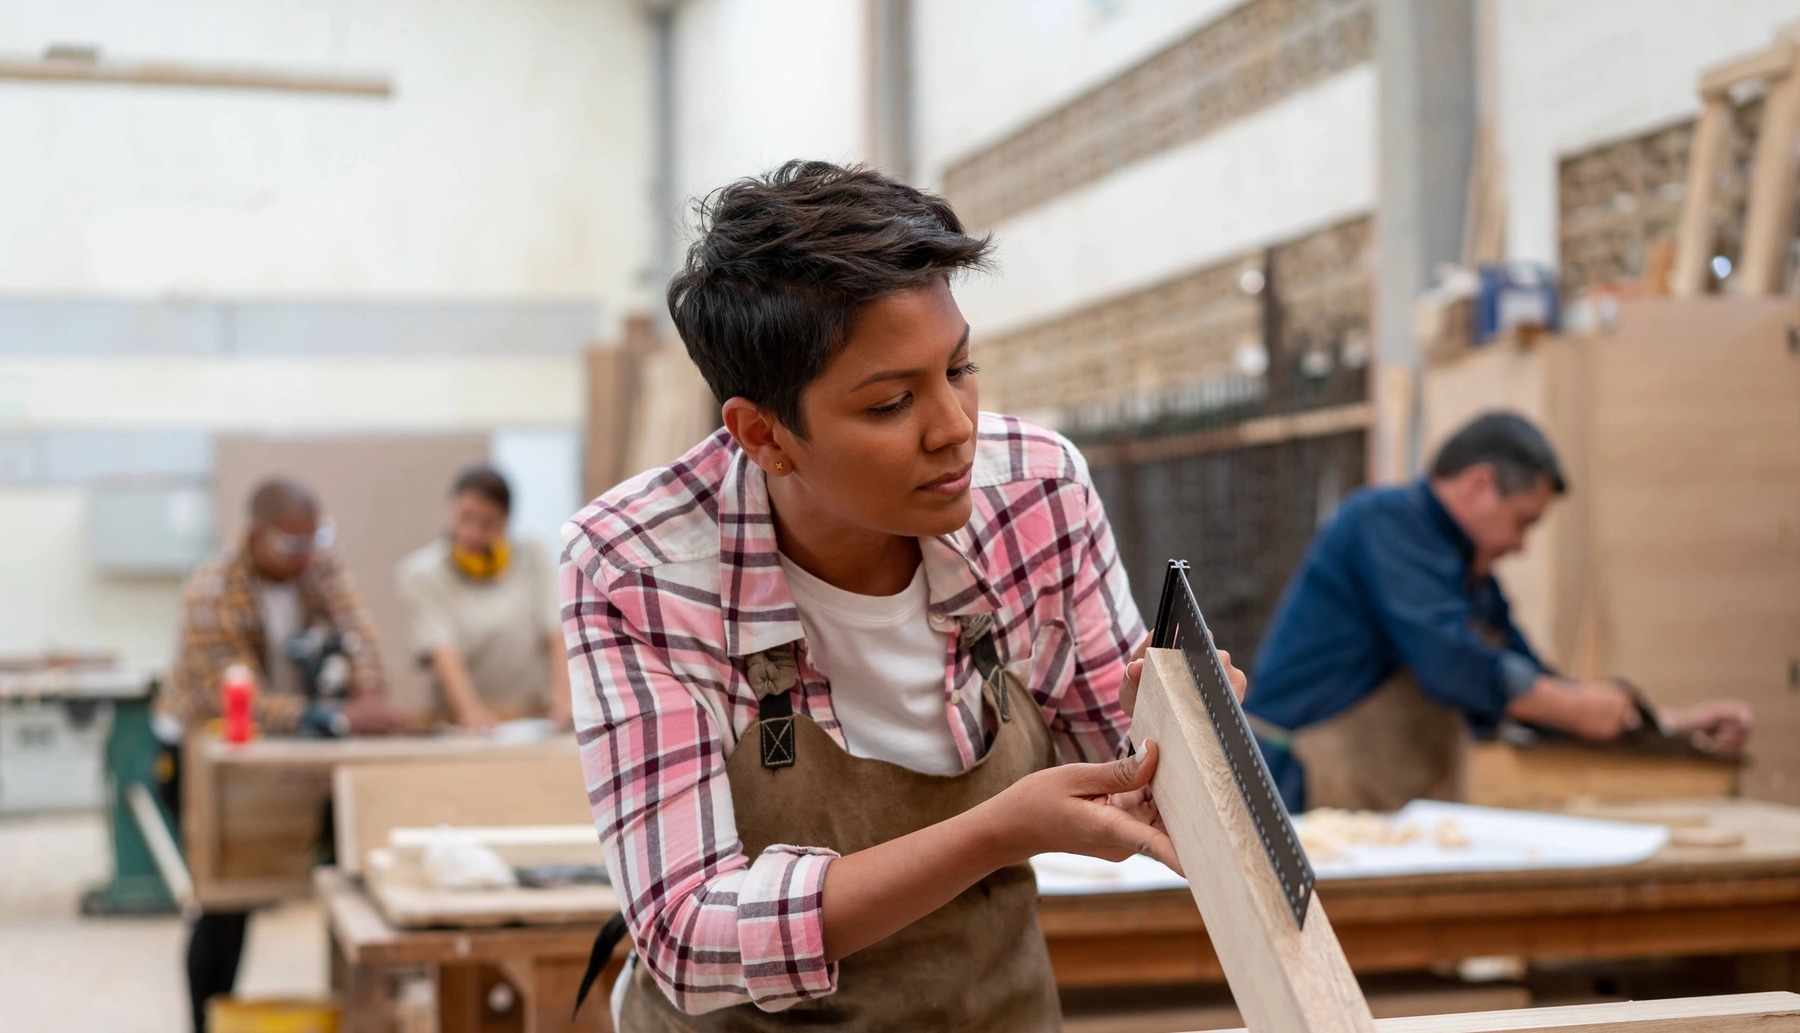 A person with short hair and a pink plaid shirt measures a piece of wood in a carpentry workshop.